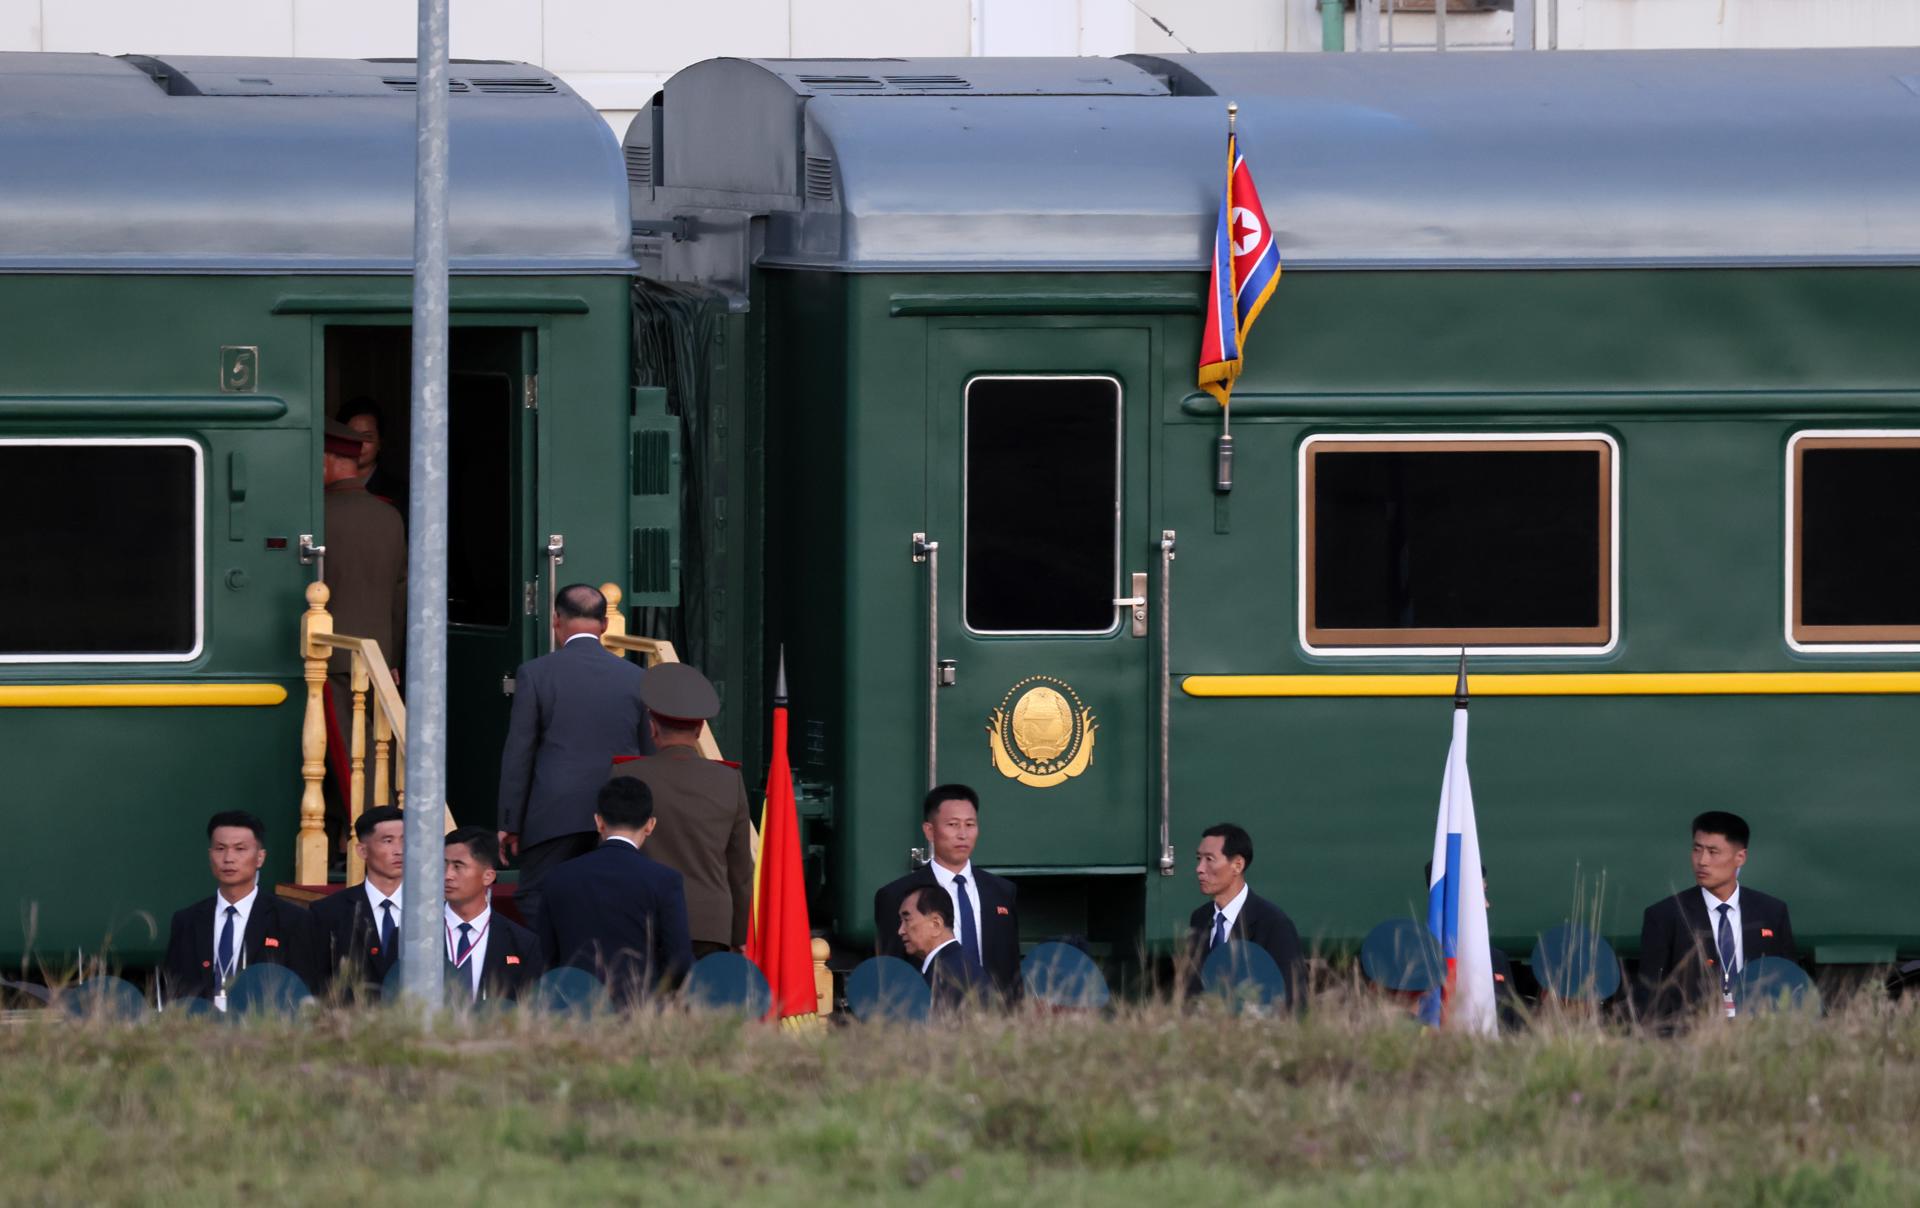 North Korean leader Kim Jong Un boards a train after a meeting with Russian President Vladimir Putin at the Vostochny cosmodrome outside of the town of Tsiolkovsky (former Uglegorsk), some 180 km north of Blagoveschensk in Amur region, Russia, 13 September 2023. EFE/EPA/PAVEL BYRKIN / SPUTNIK / KREMLIN POOL MANDATORY CREDIT